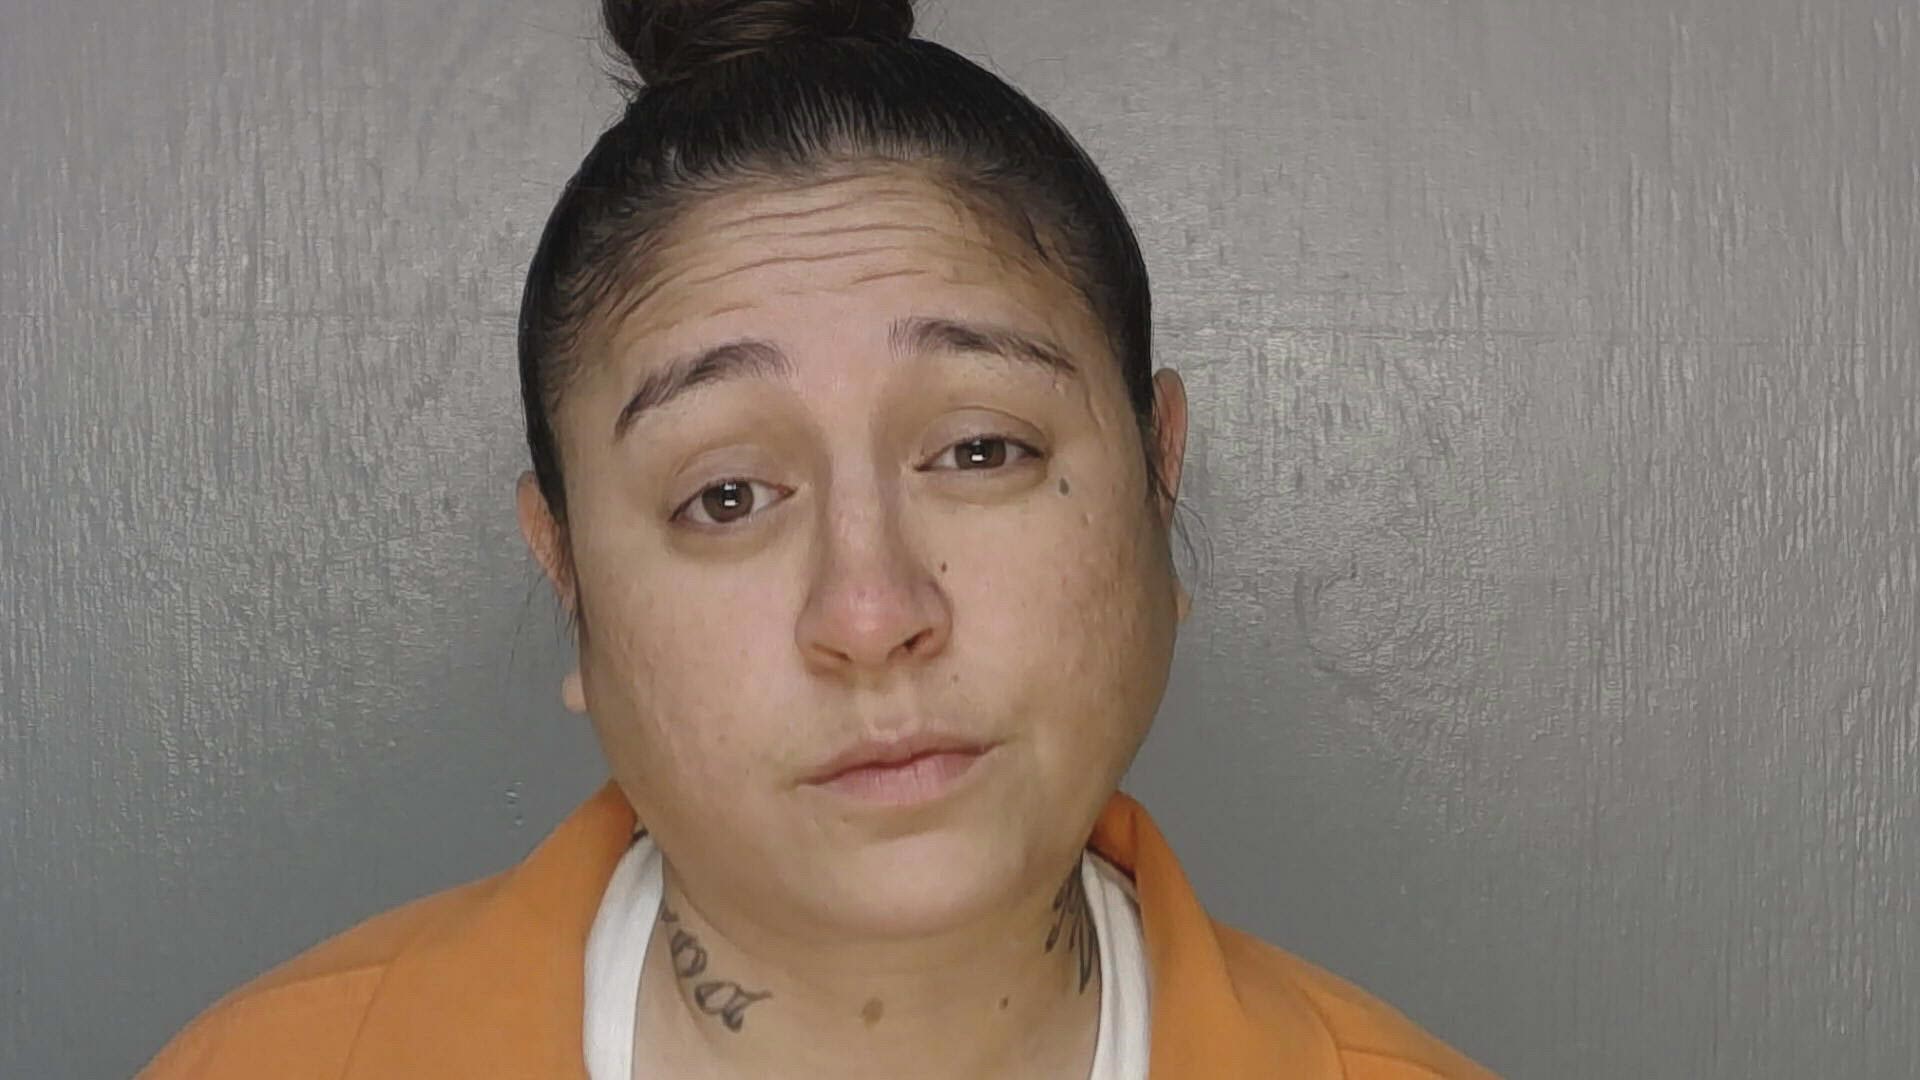 Deputies say she was driving drunk with her 6-year-old in the car when she ran a stop sign and crashed into a pickup truck